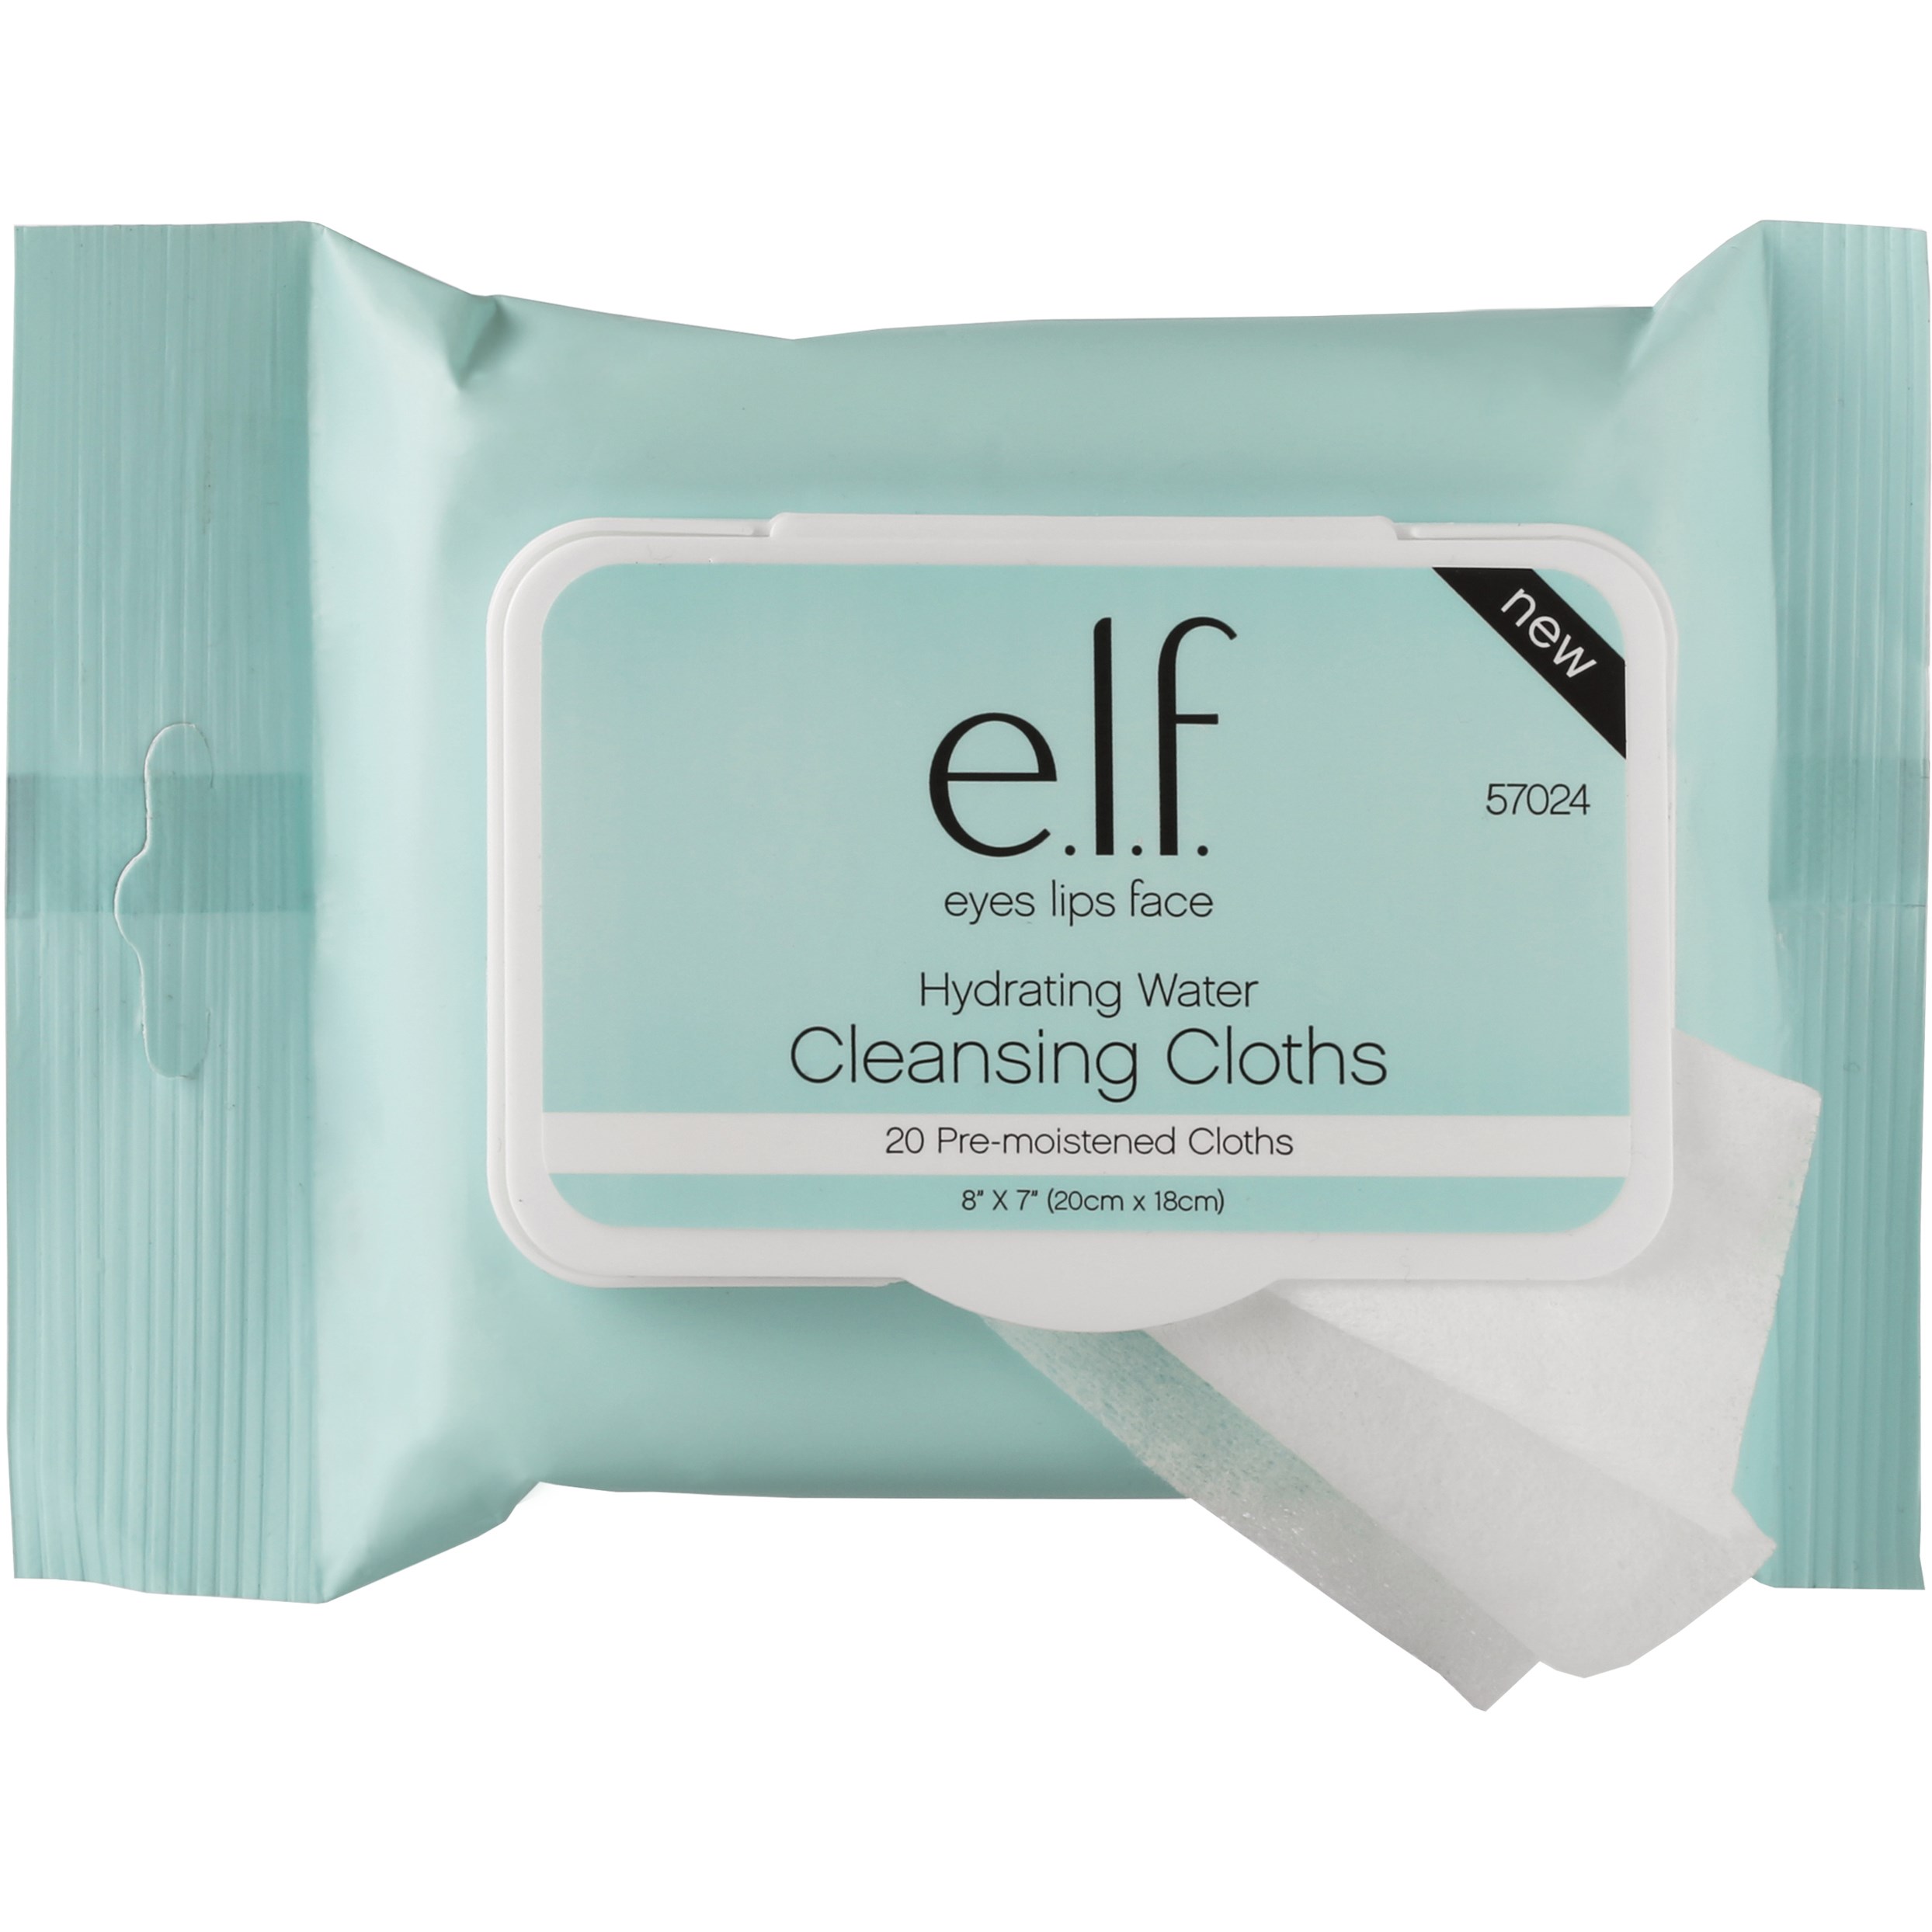 e.l.f. Hydrating Water Cleansing Cloths